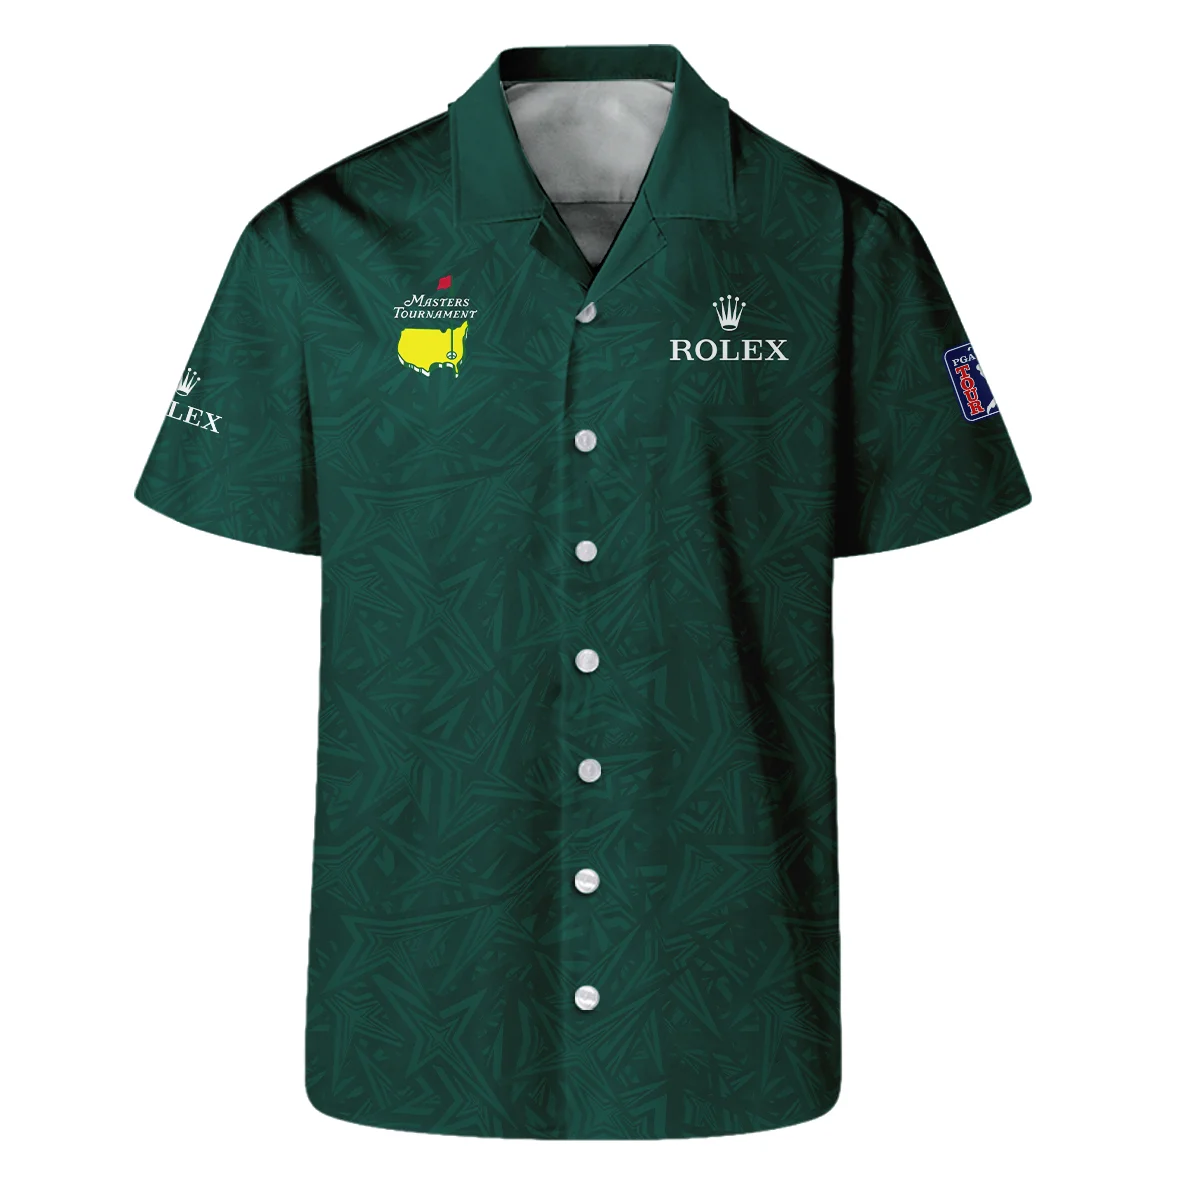 Stars Dark Green Abstract Sport Masters Tournament Rolex Vneck Long Polo Shirt Style Classic Long Polo Shirt For Men